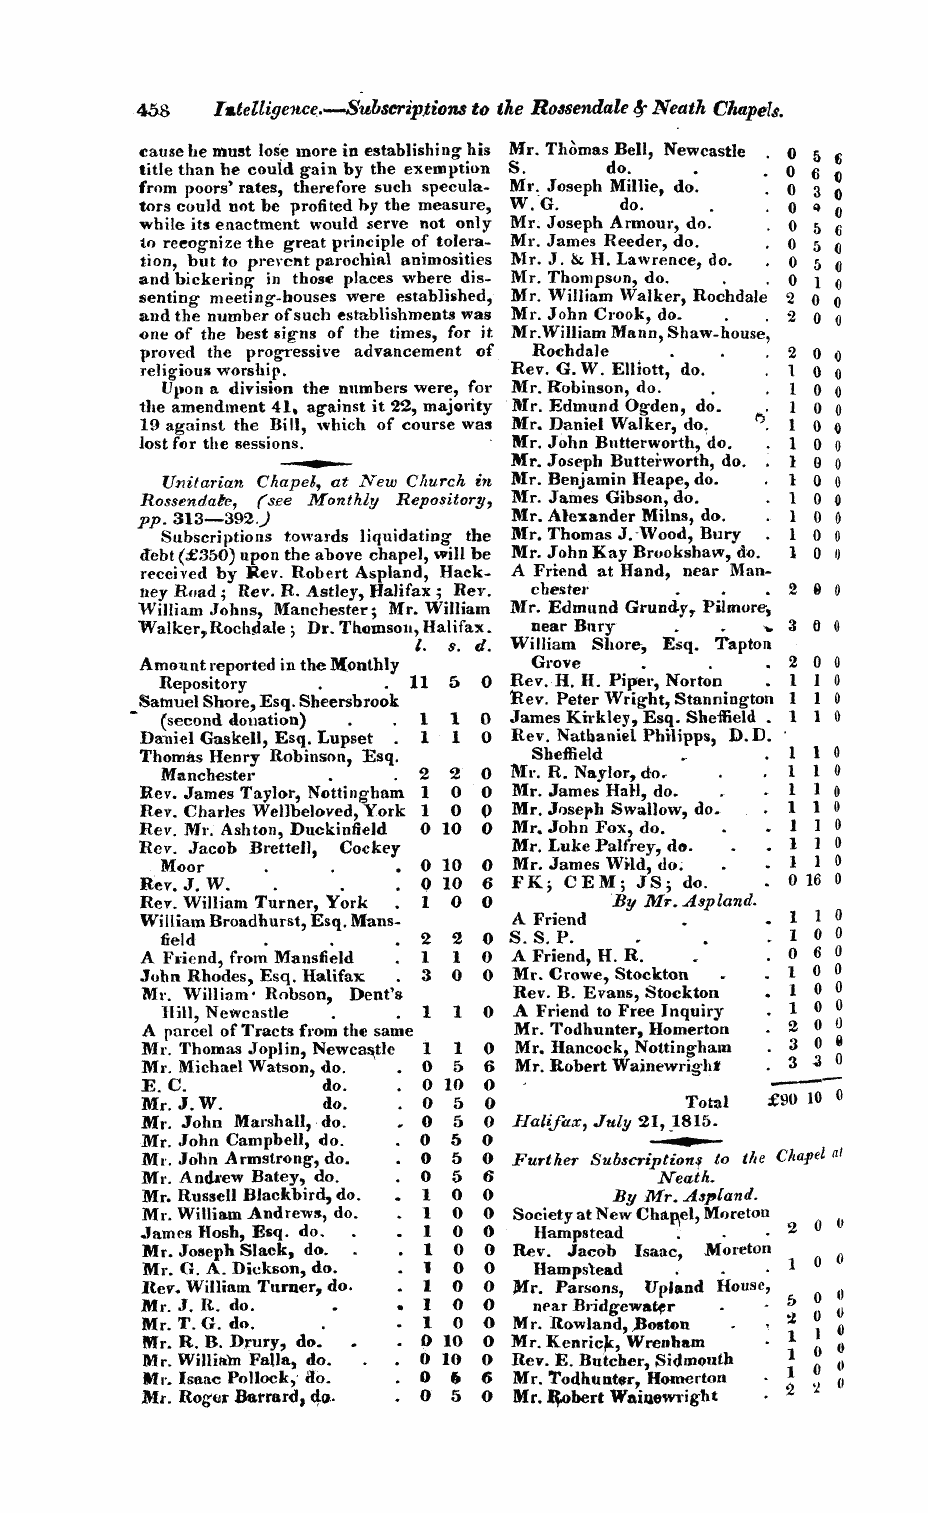 Monthly Repository (1806-1838) and Unitarian Chronicle (1832-1833): F Y, 1st edition: 58